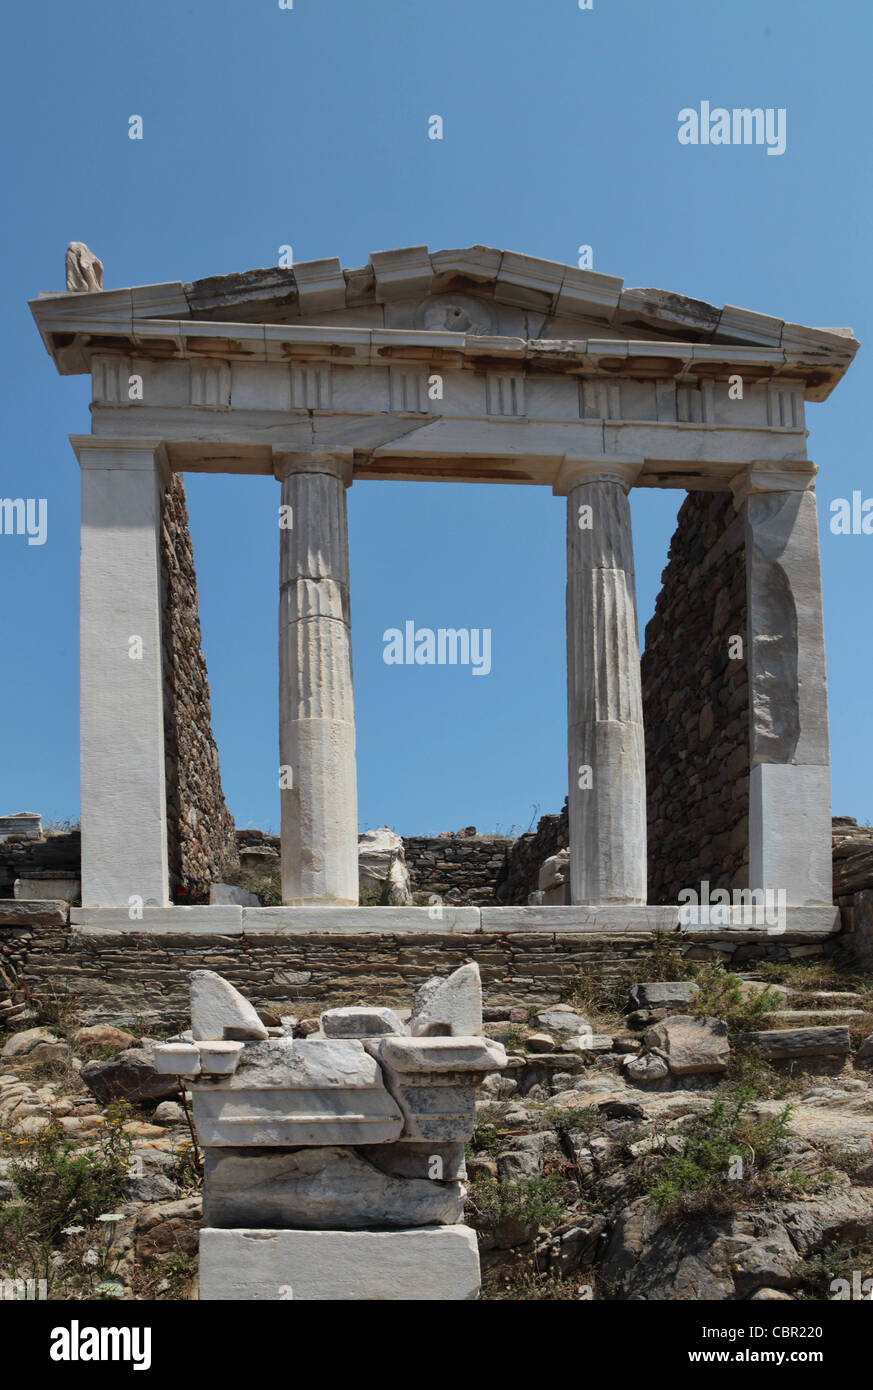 Temple of Isis on the island of Delos in the Cyclades Greece Stock Photo